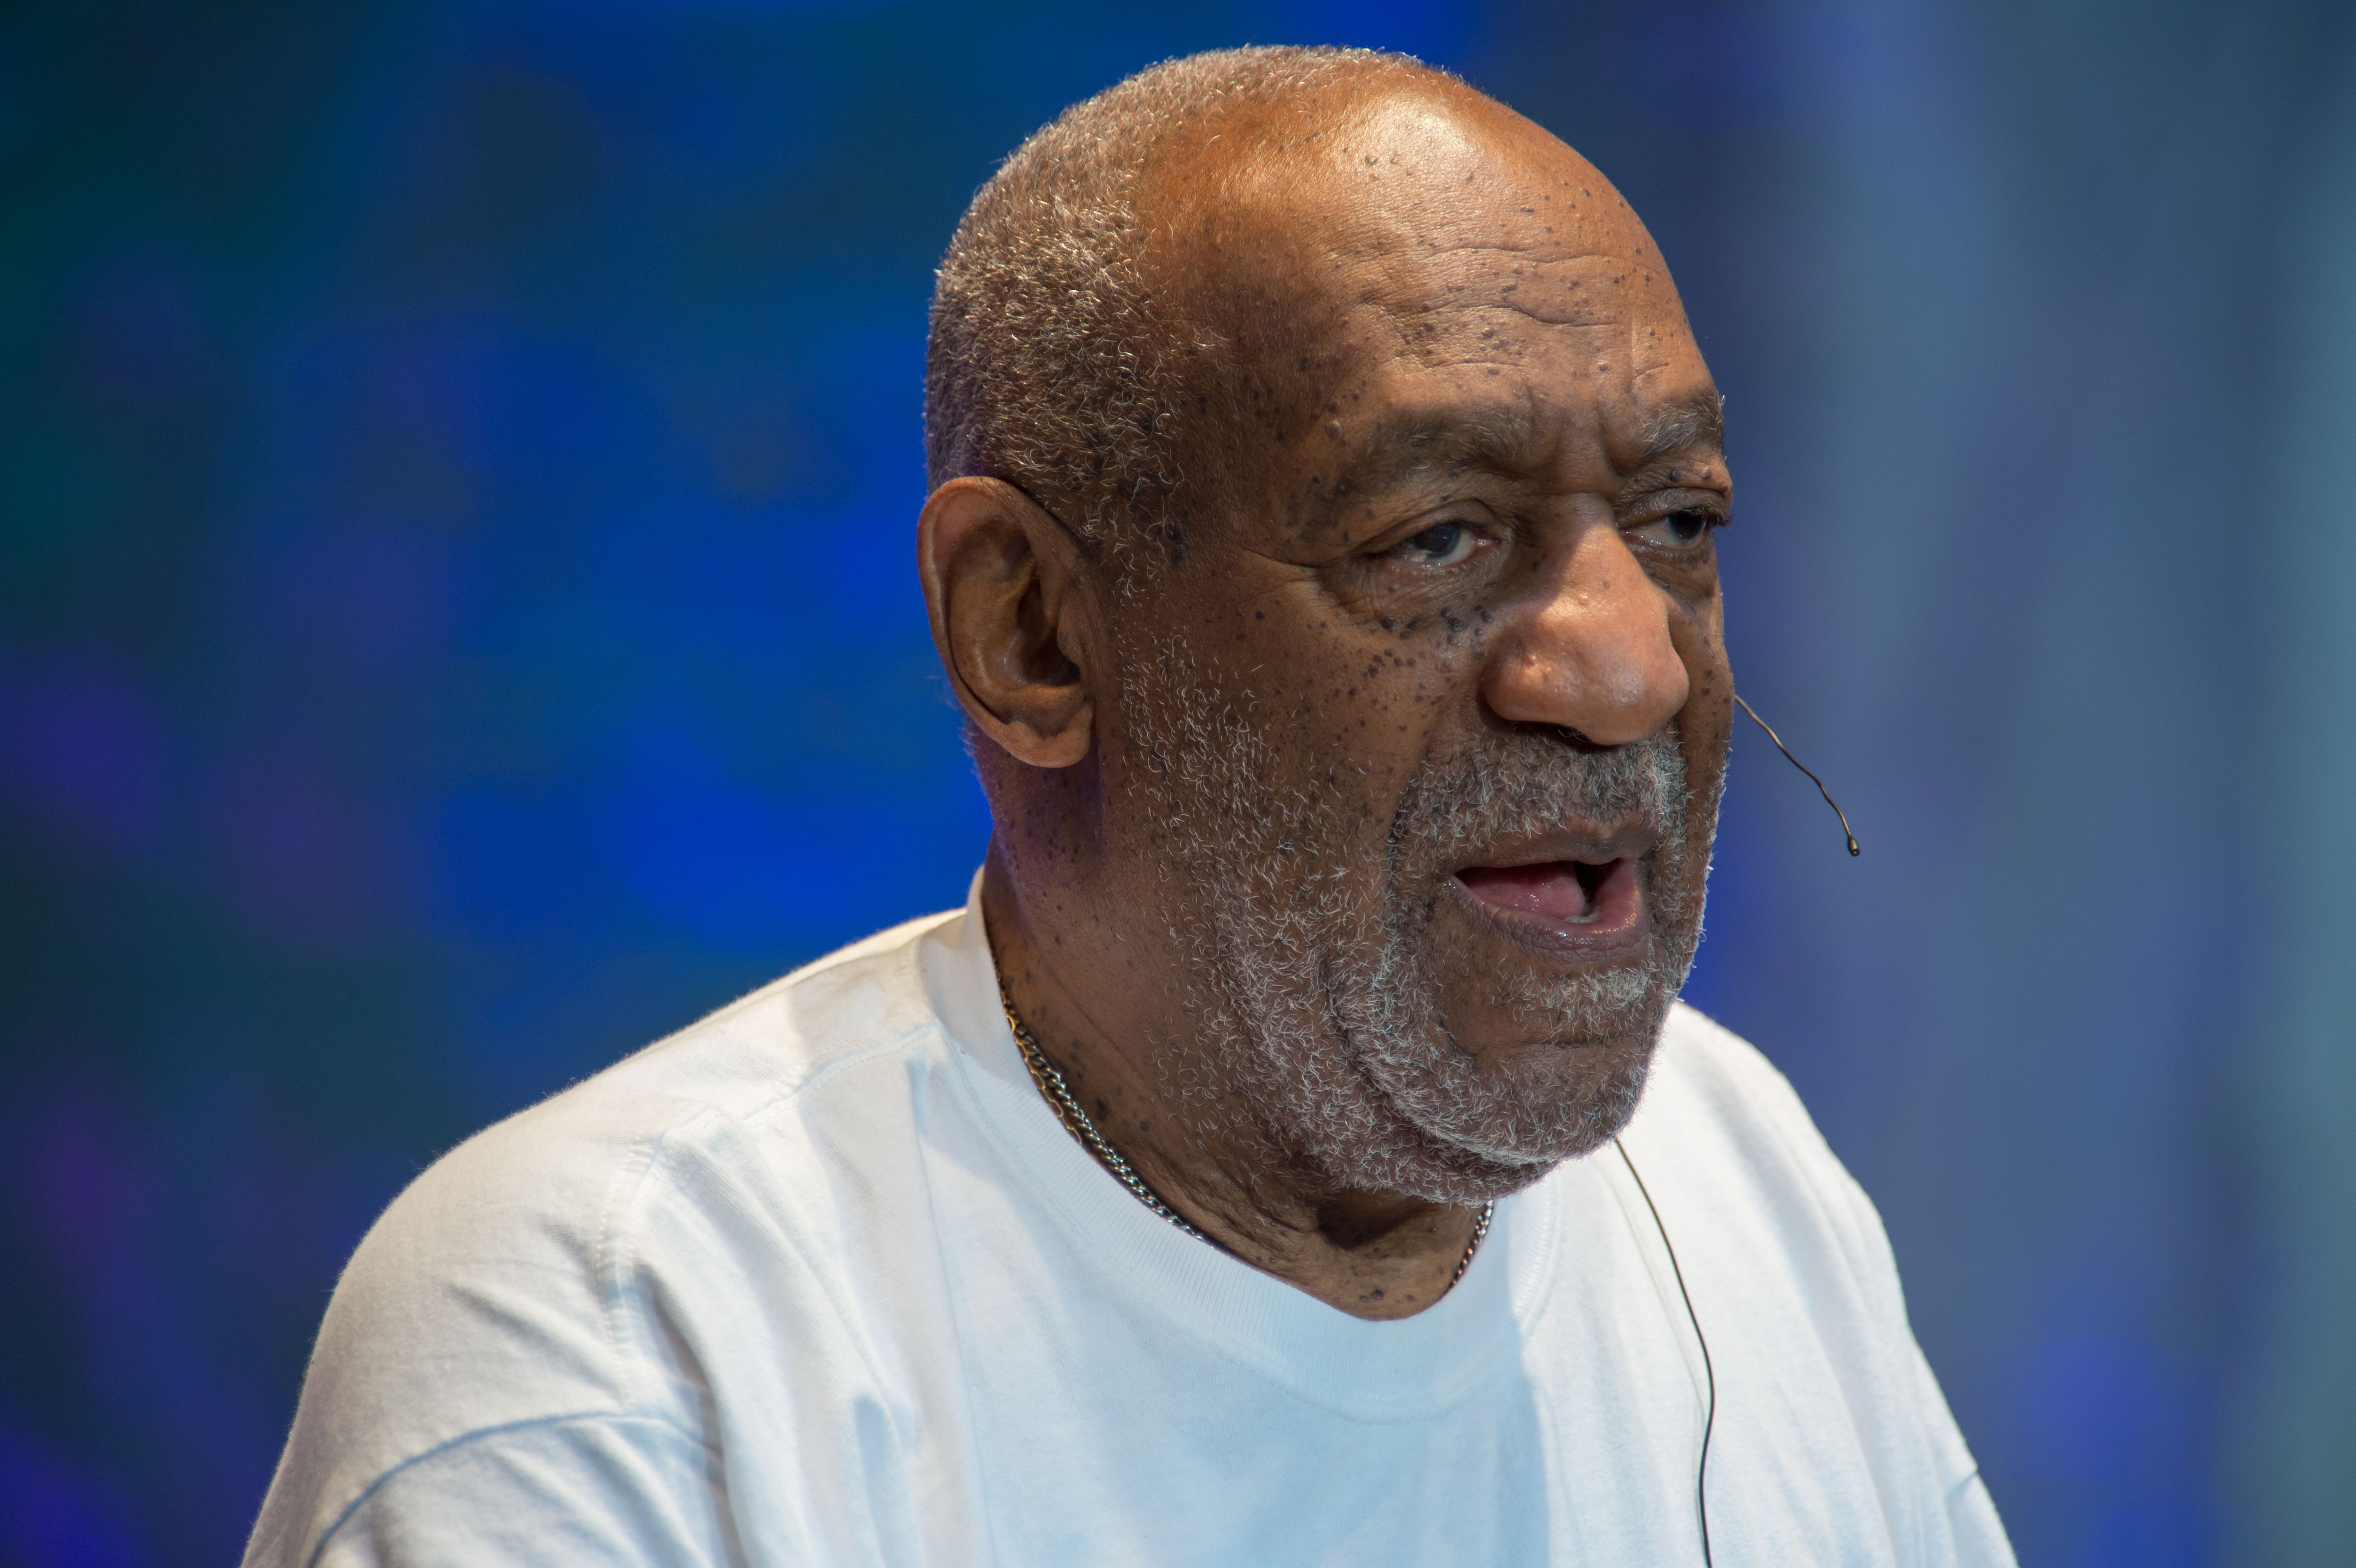 Comedian Bill Cosby speaks at an event.